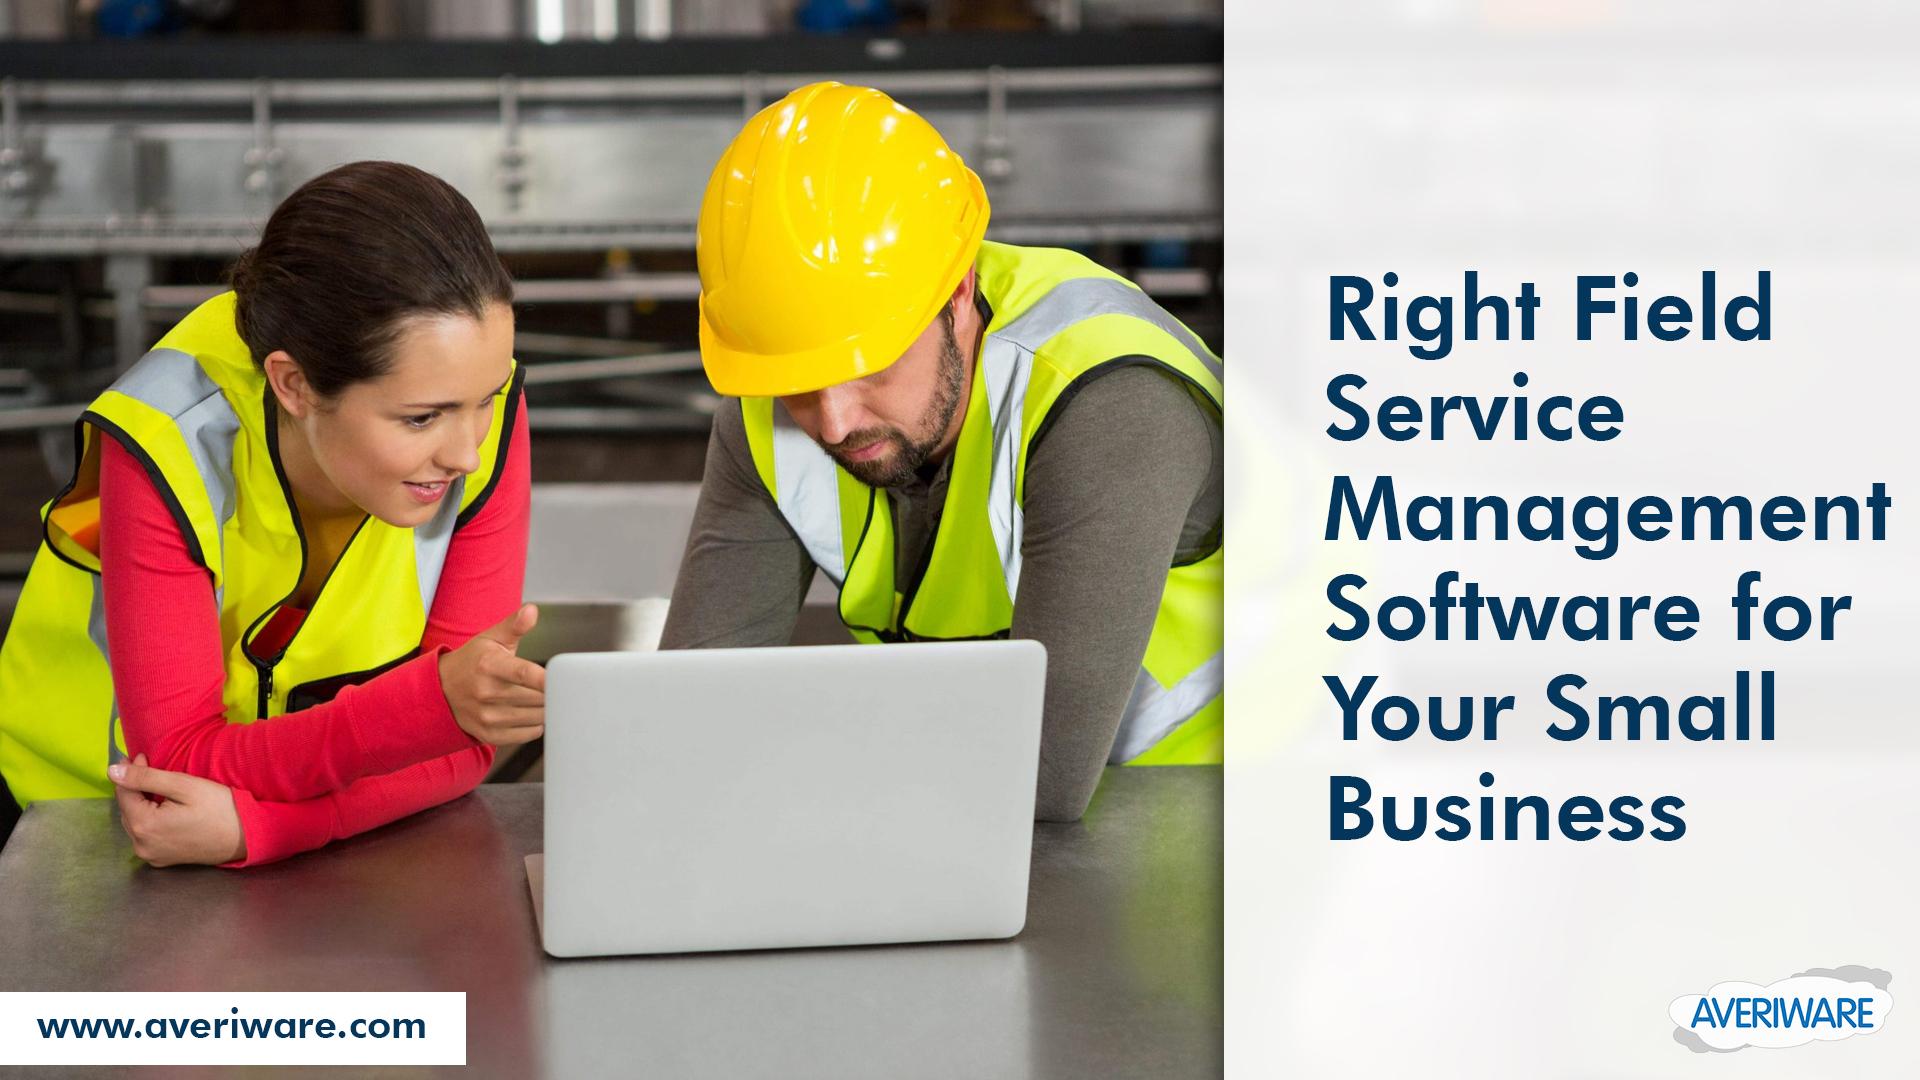 Finding the Right Field Service Management Software for Your Small Business